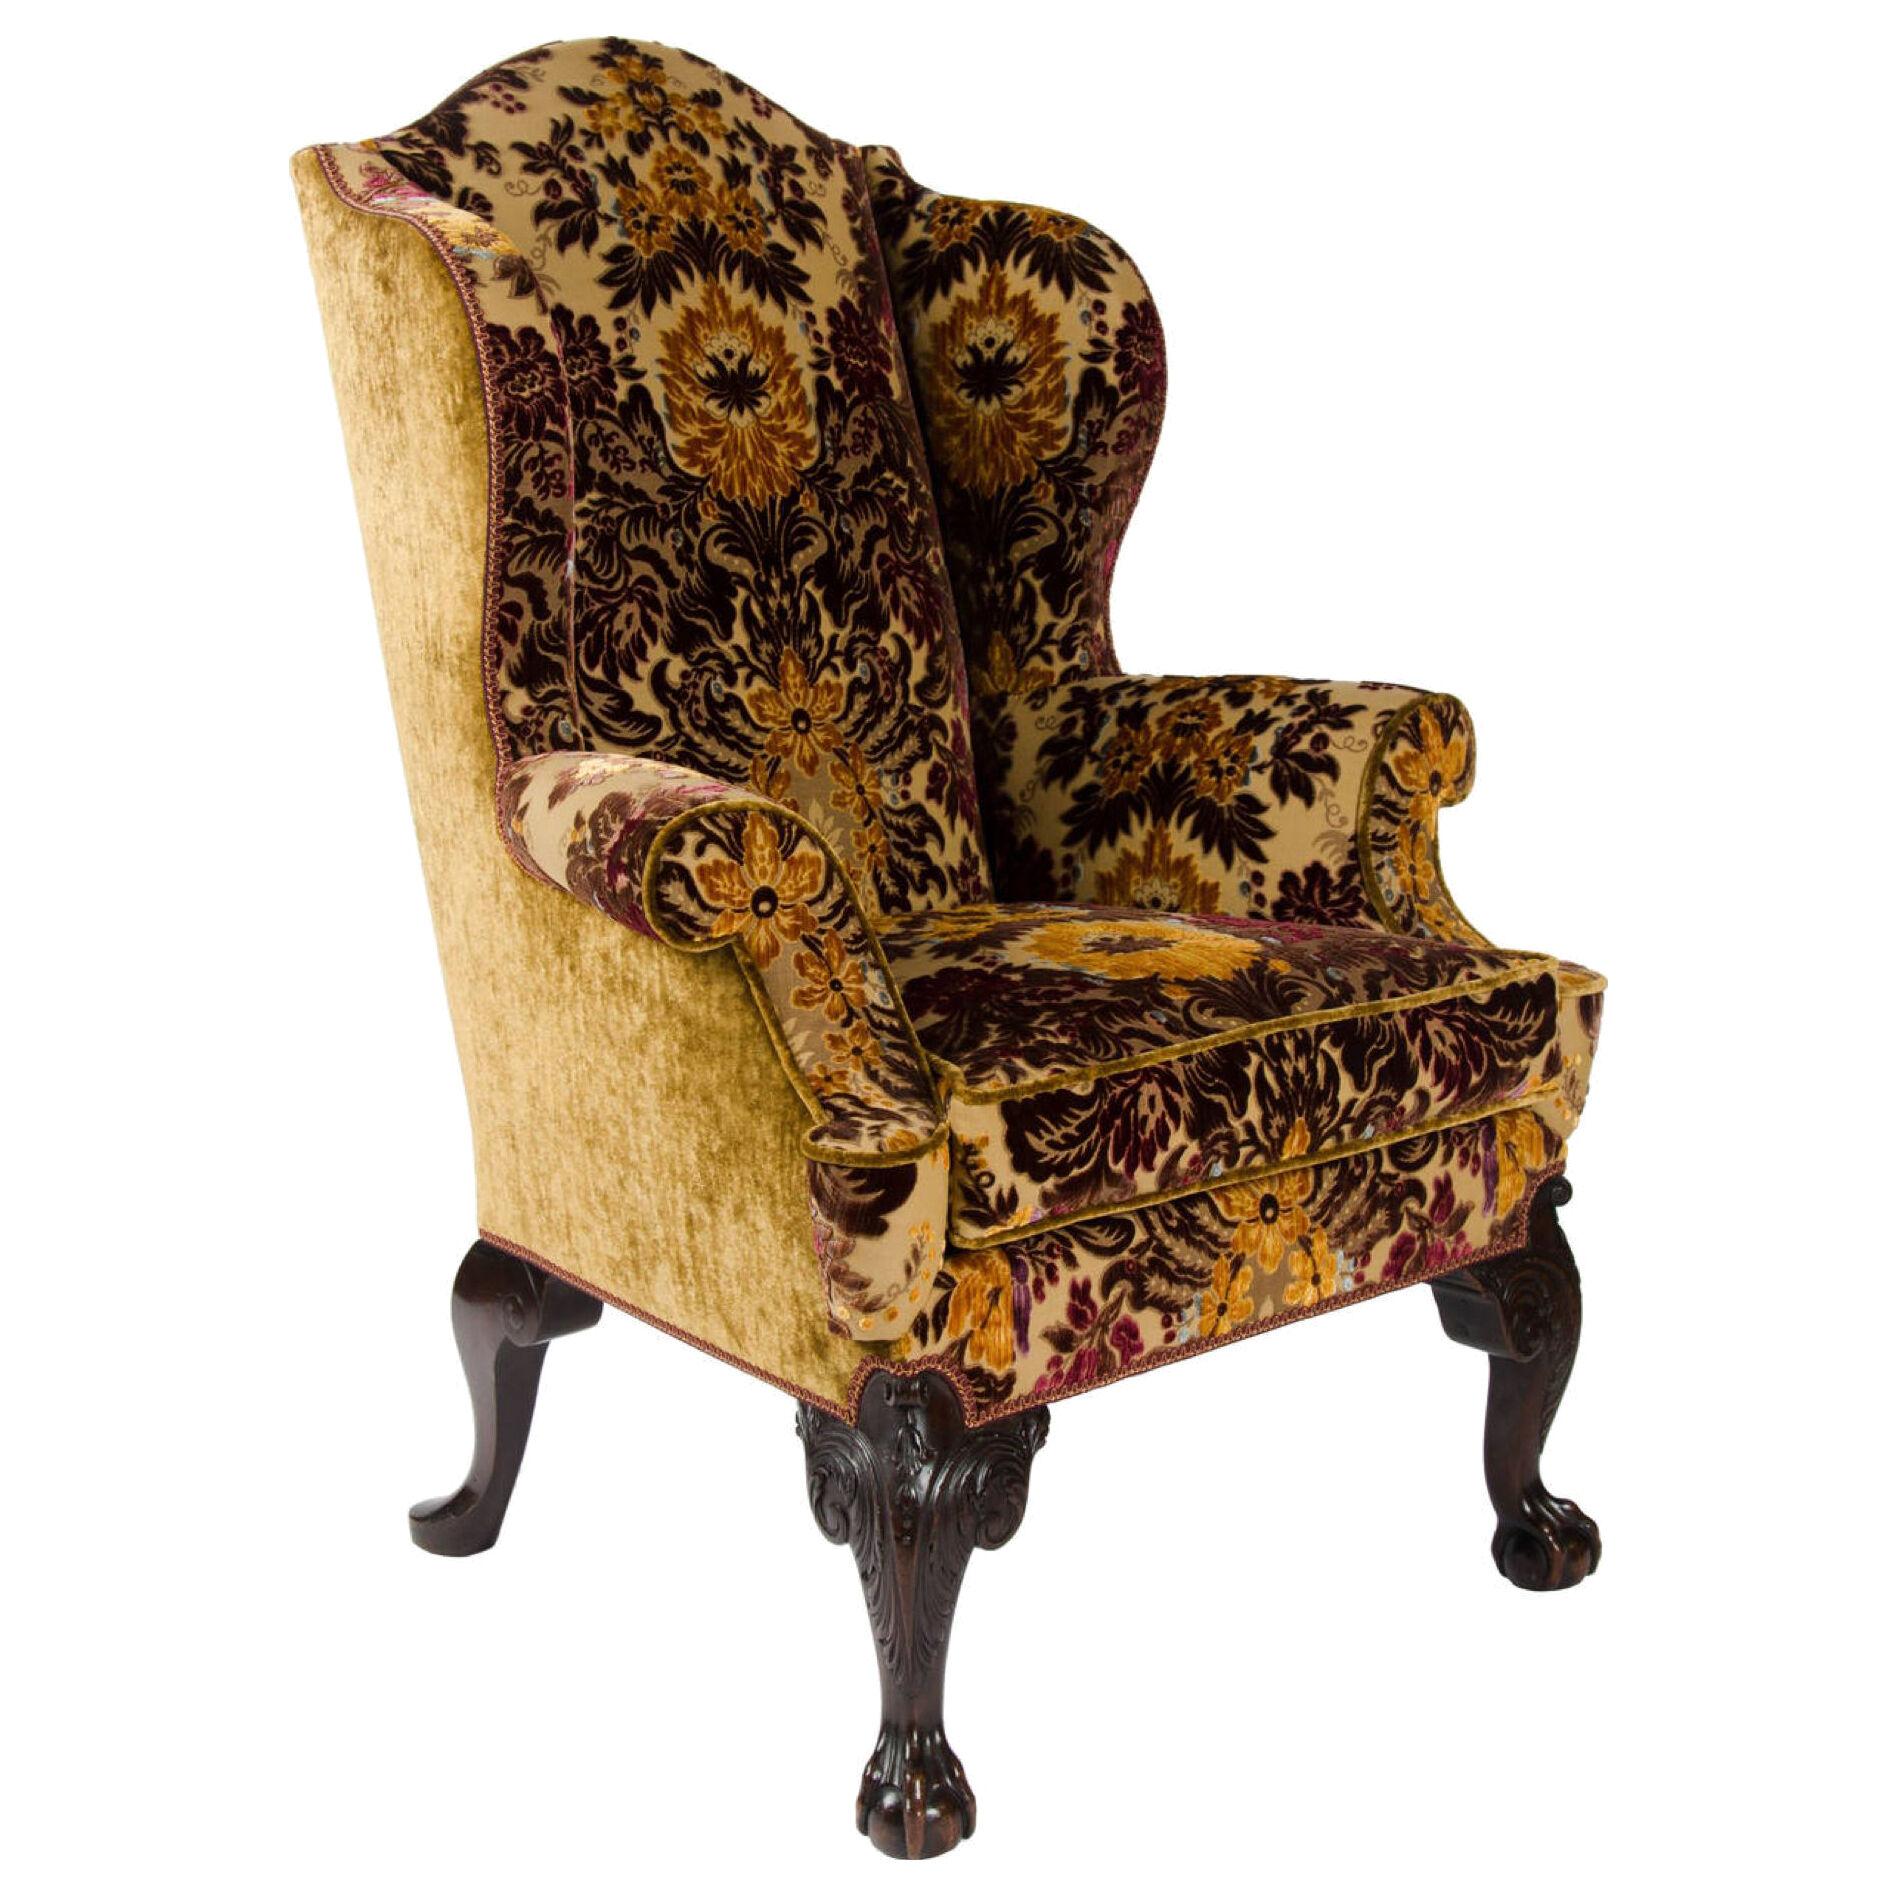 19th century wing chair with cabriole legs of good proportions.